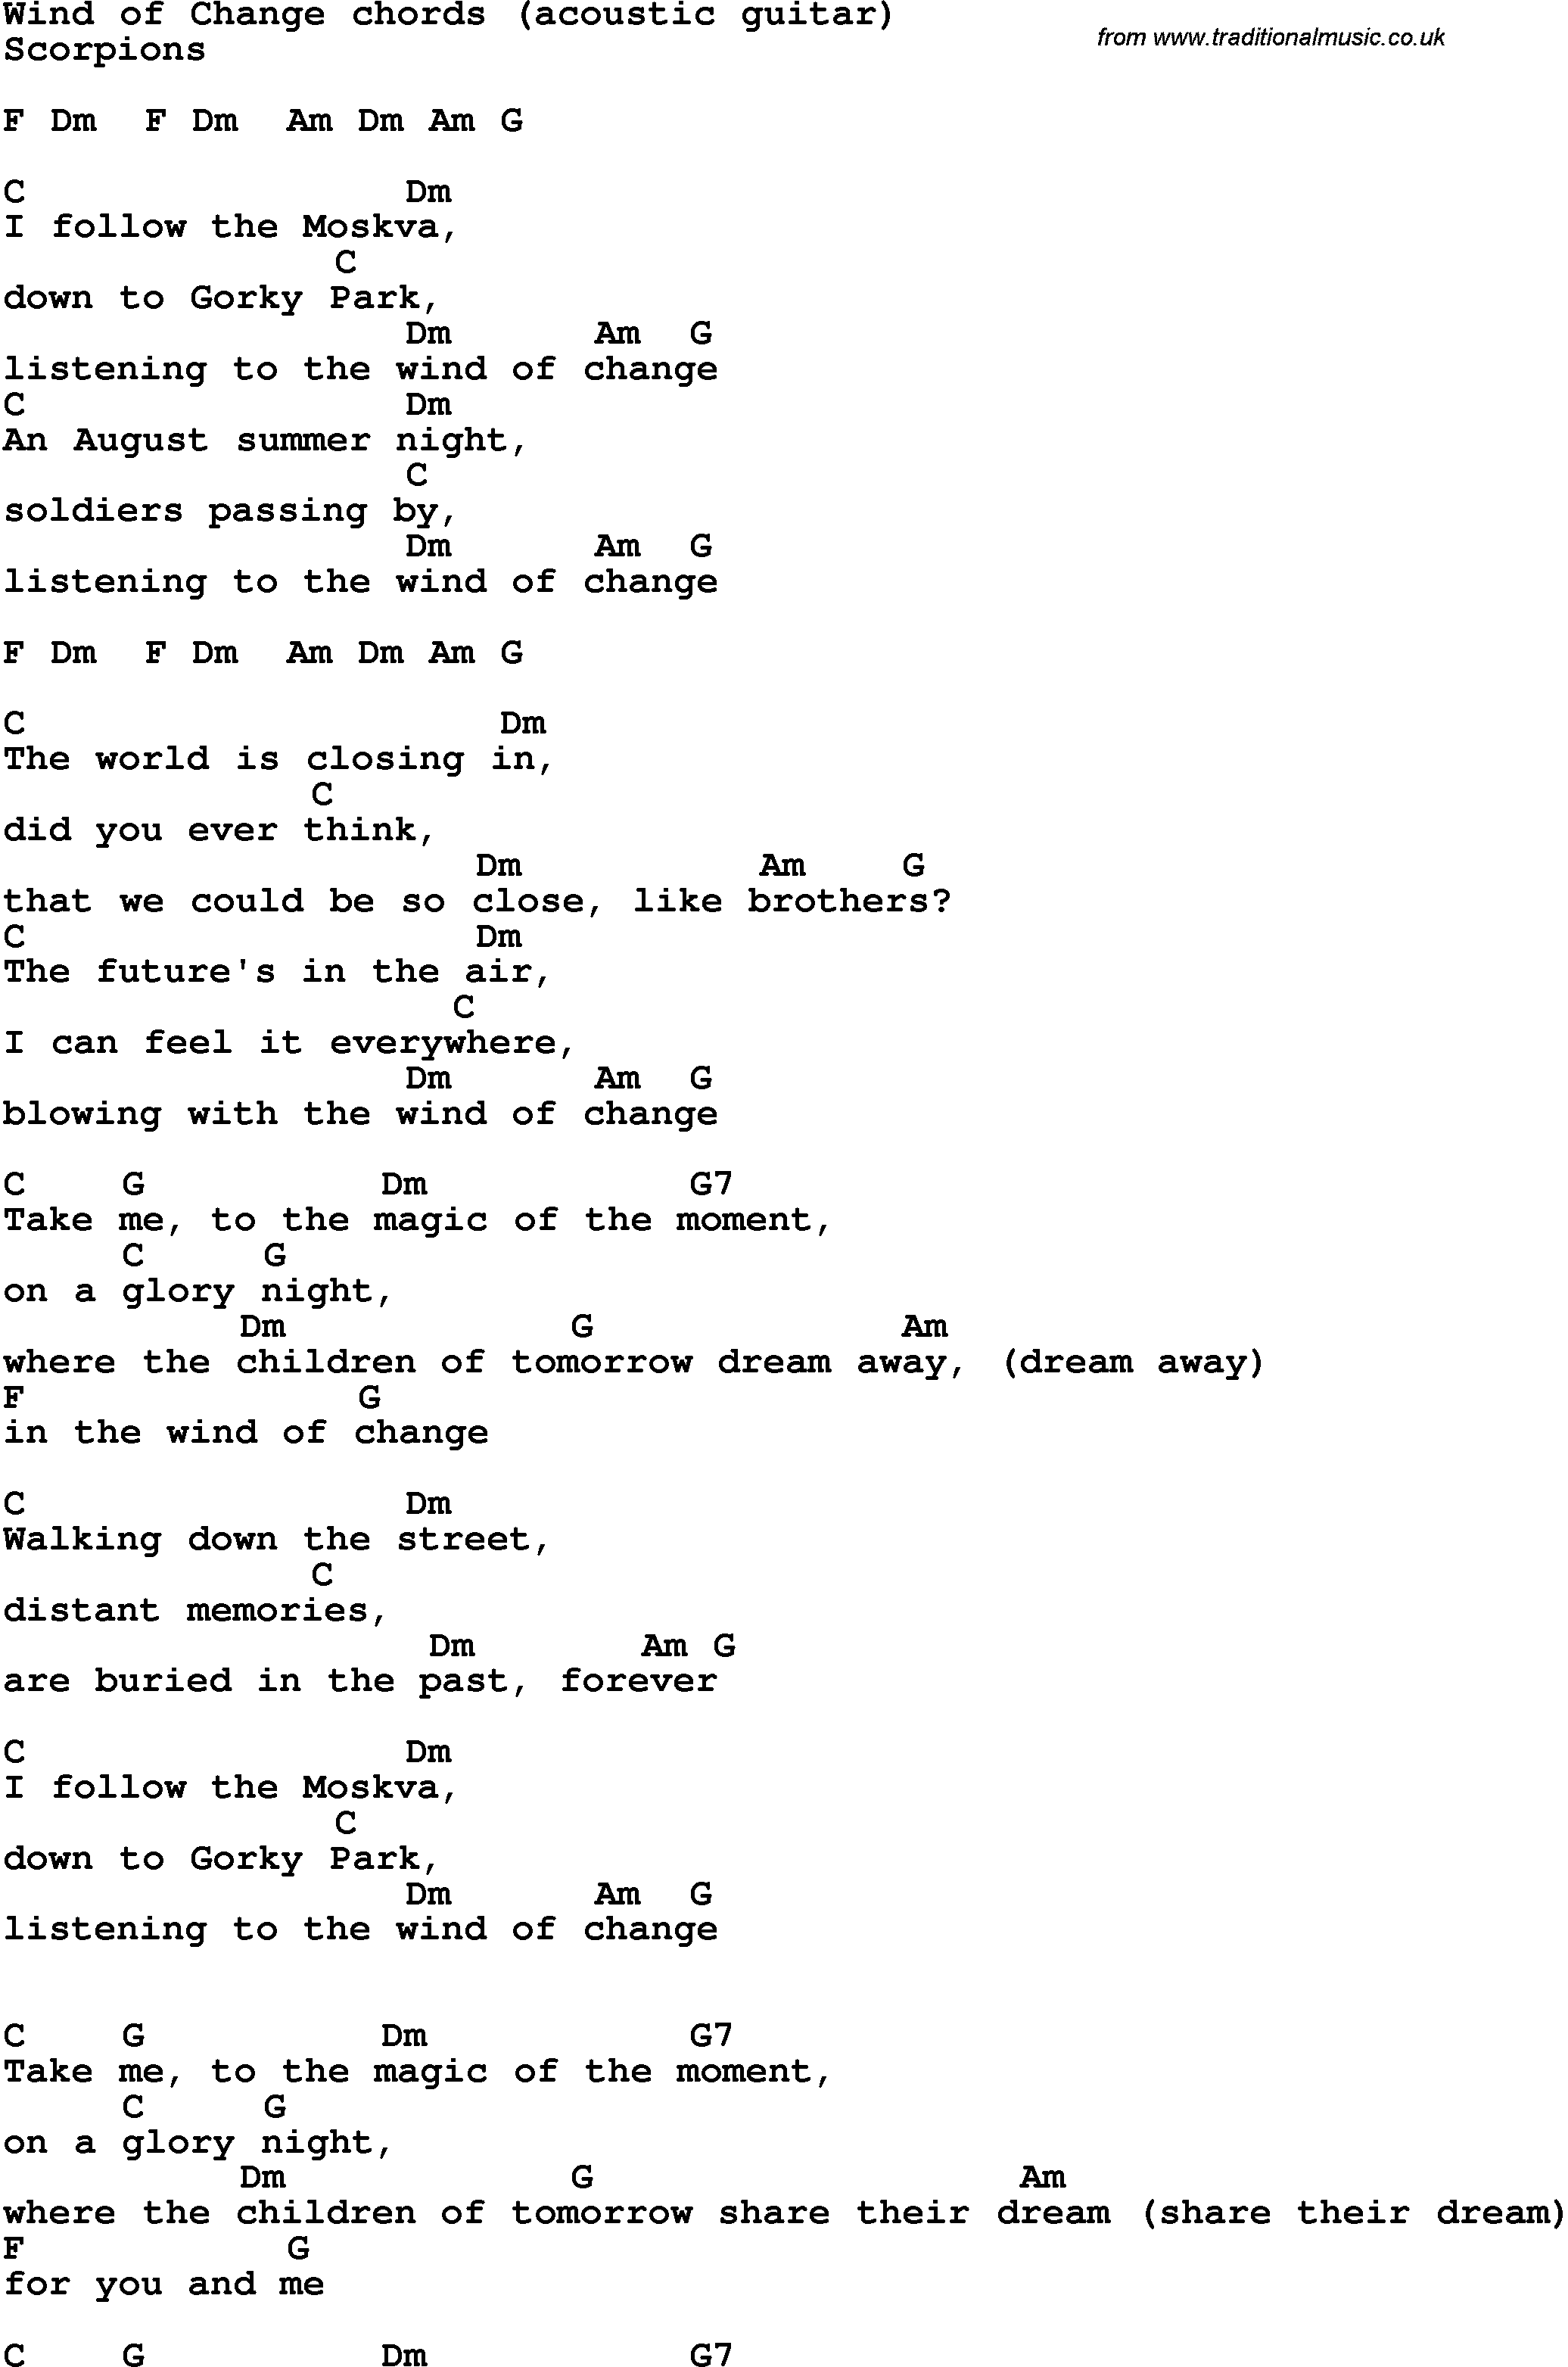 Song Lyrics with guitar chords for Wind Of Change